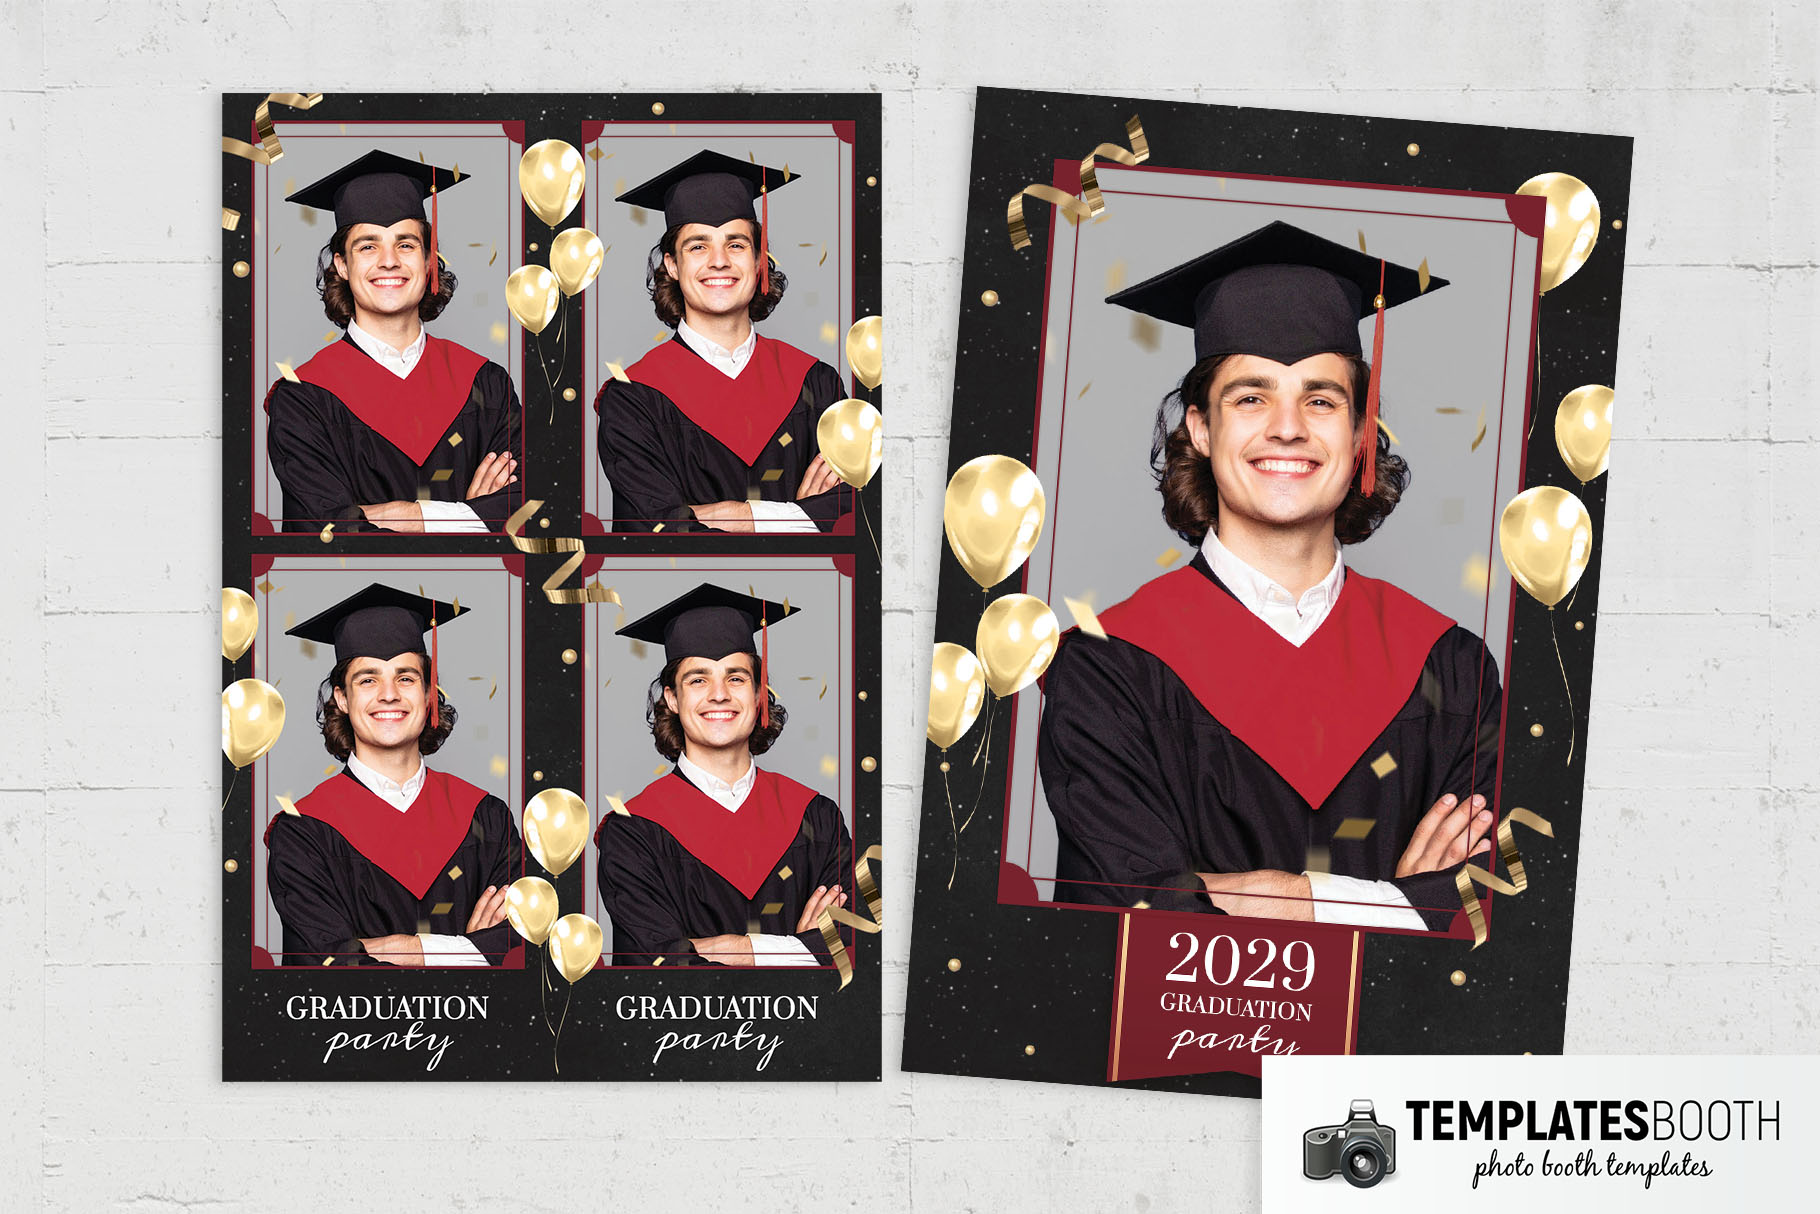 Graduation Party Photo Booth Template